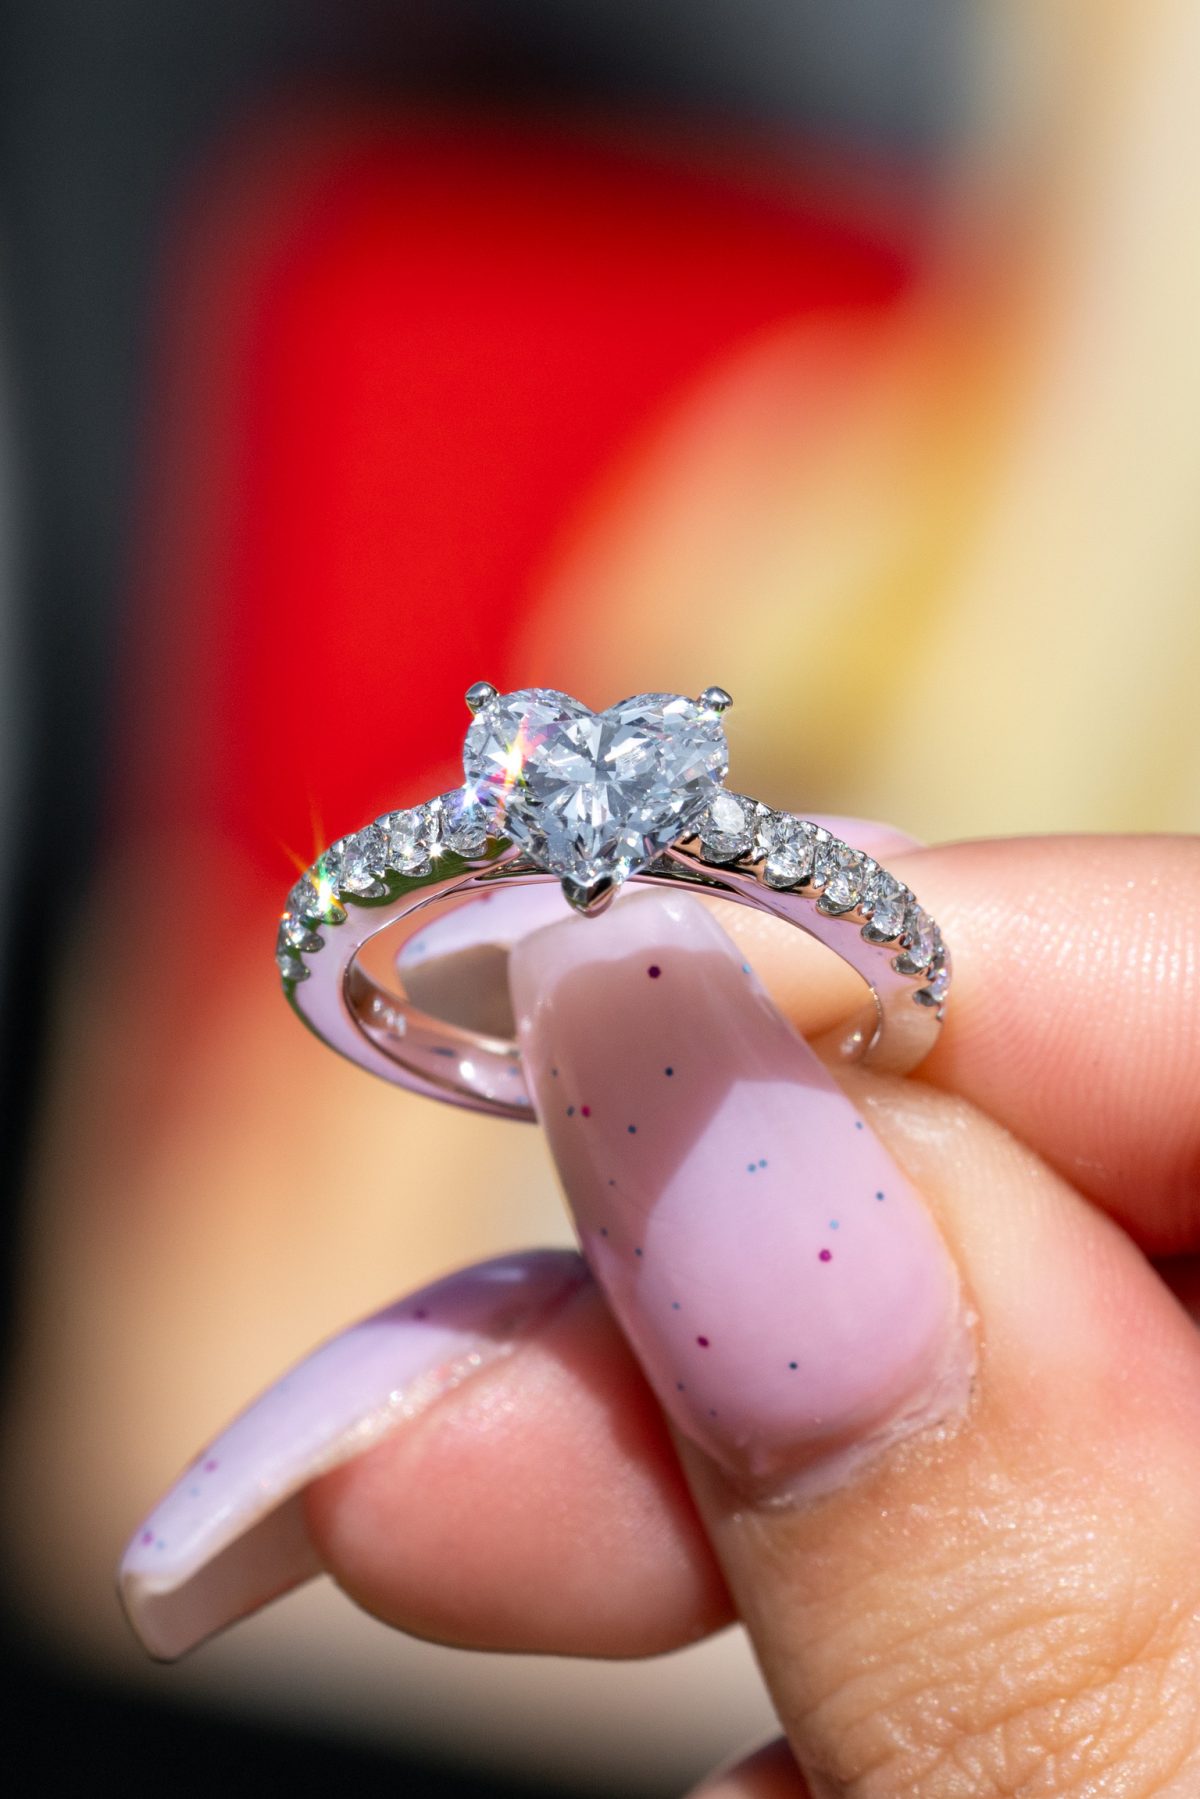 History of the heart-shaped diamond engagement ring